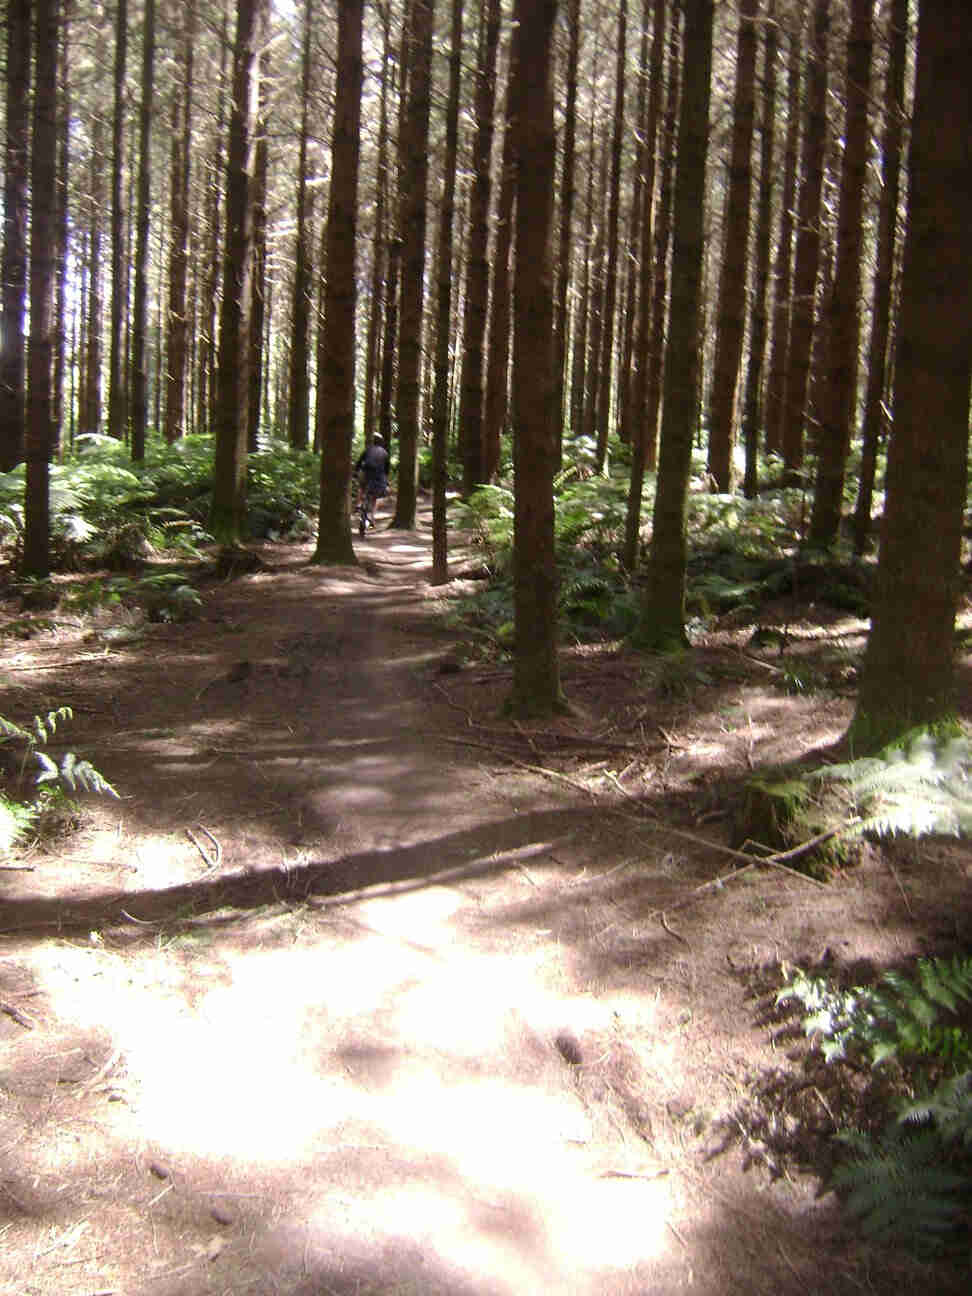 Rear view of a cyclist, riding straight away, on a dirt trail in a pine tree forest